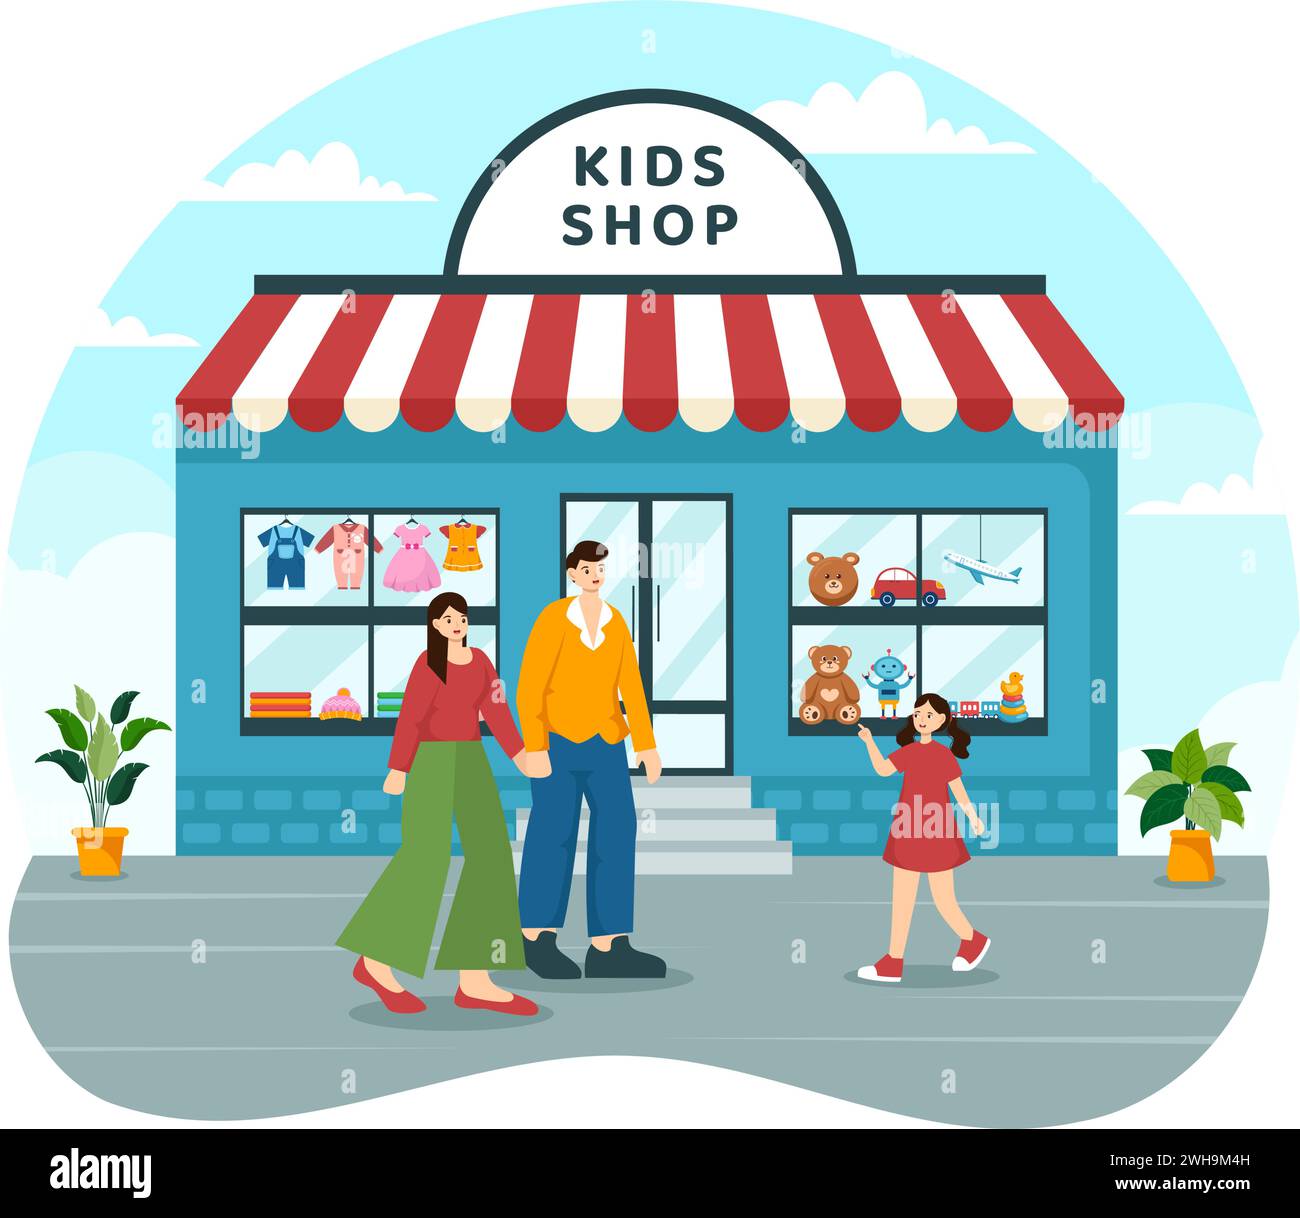 Kids Shop Vector Illustration with Boys and Girls Children Equipment such as Clothes or Toys for Shopping Concept in Flat Cartoon Background Stock Vector